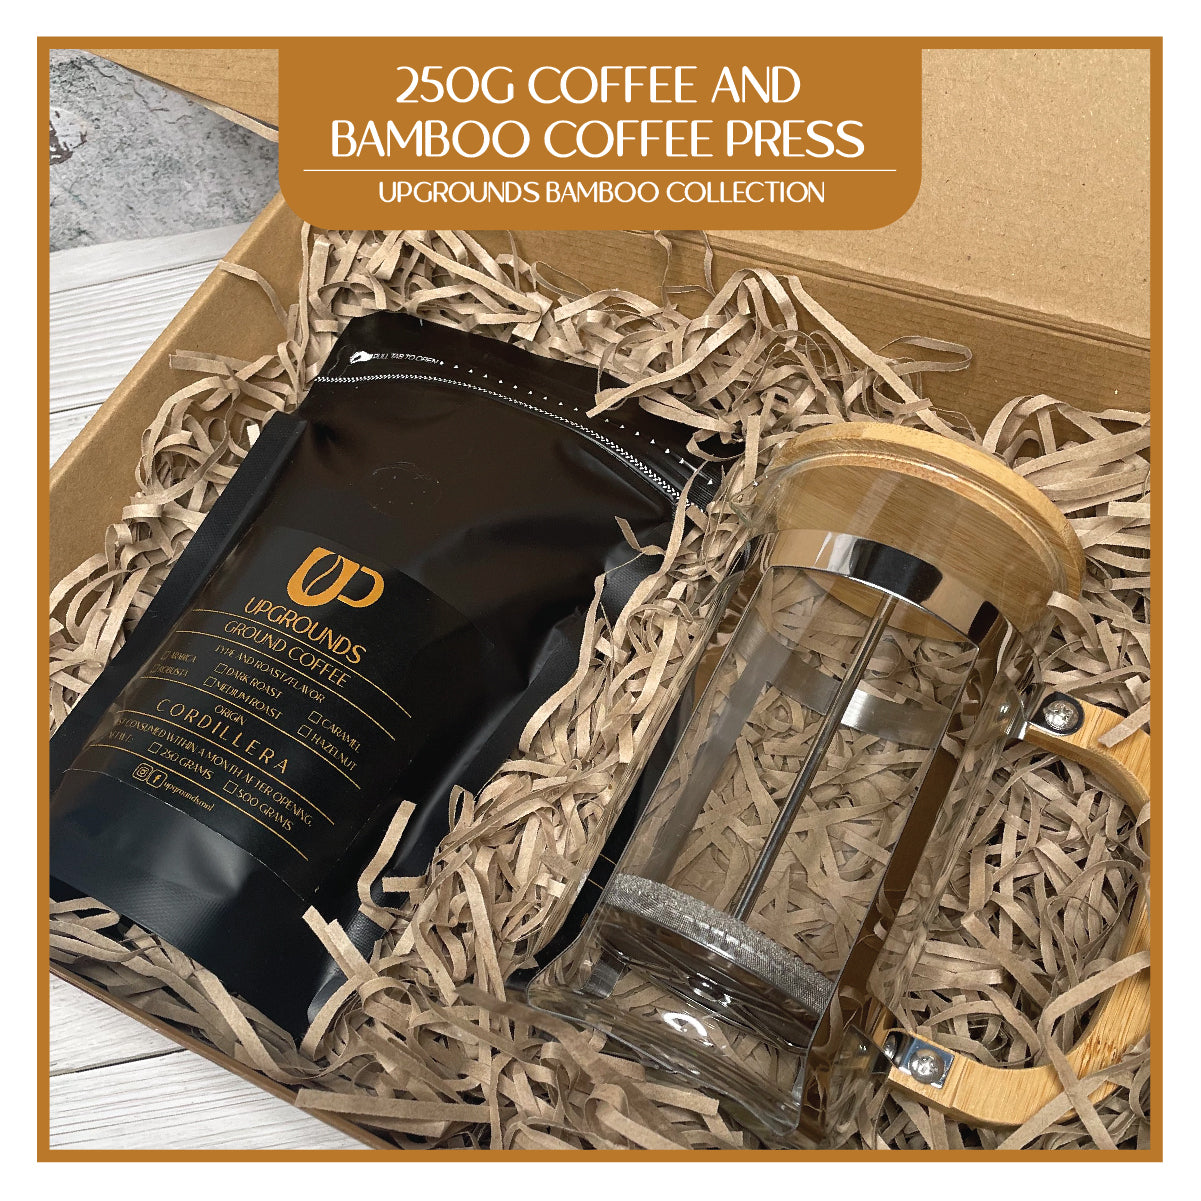 250g Coffee and Bamboo French Press | Upgrounds